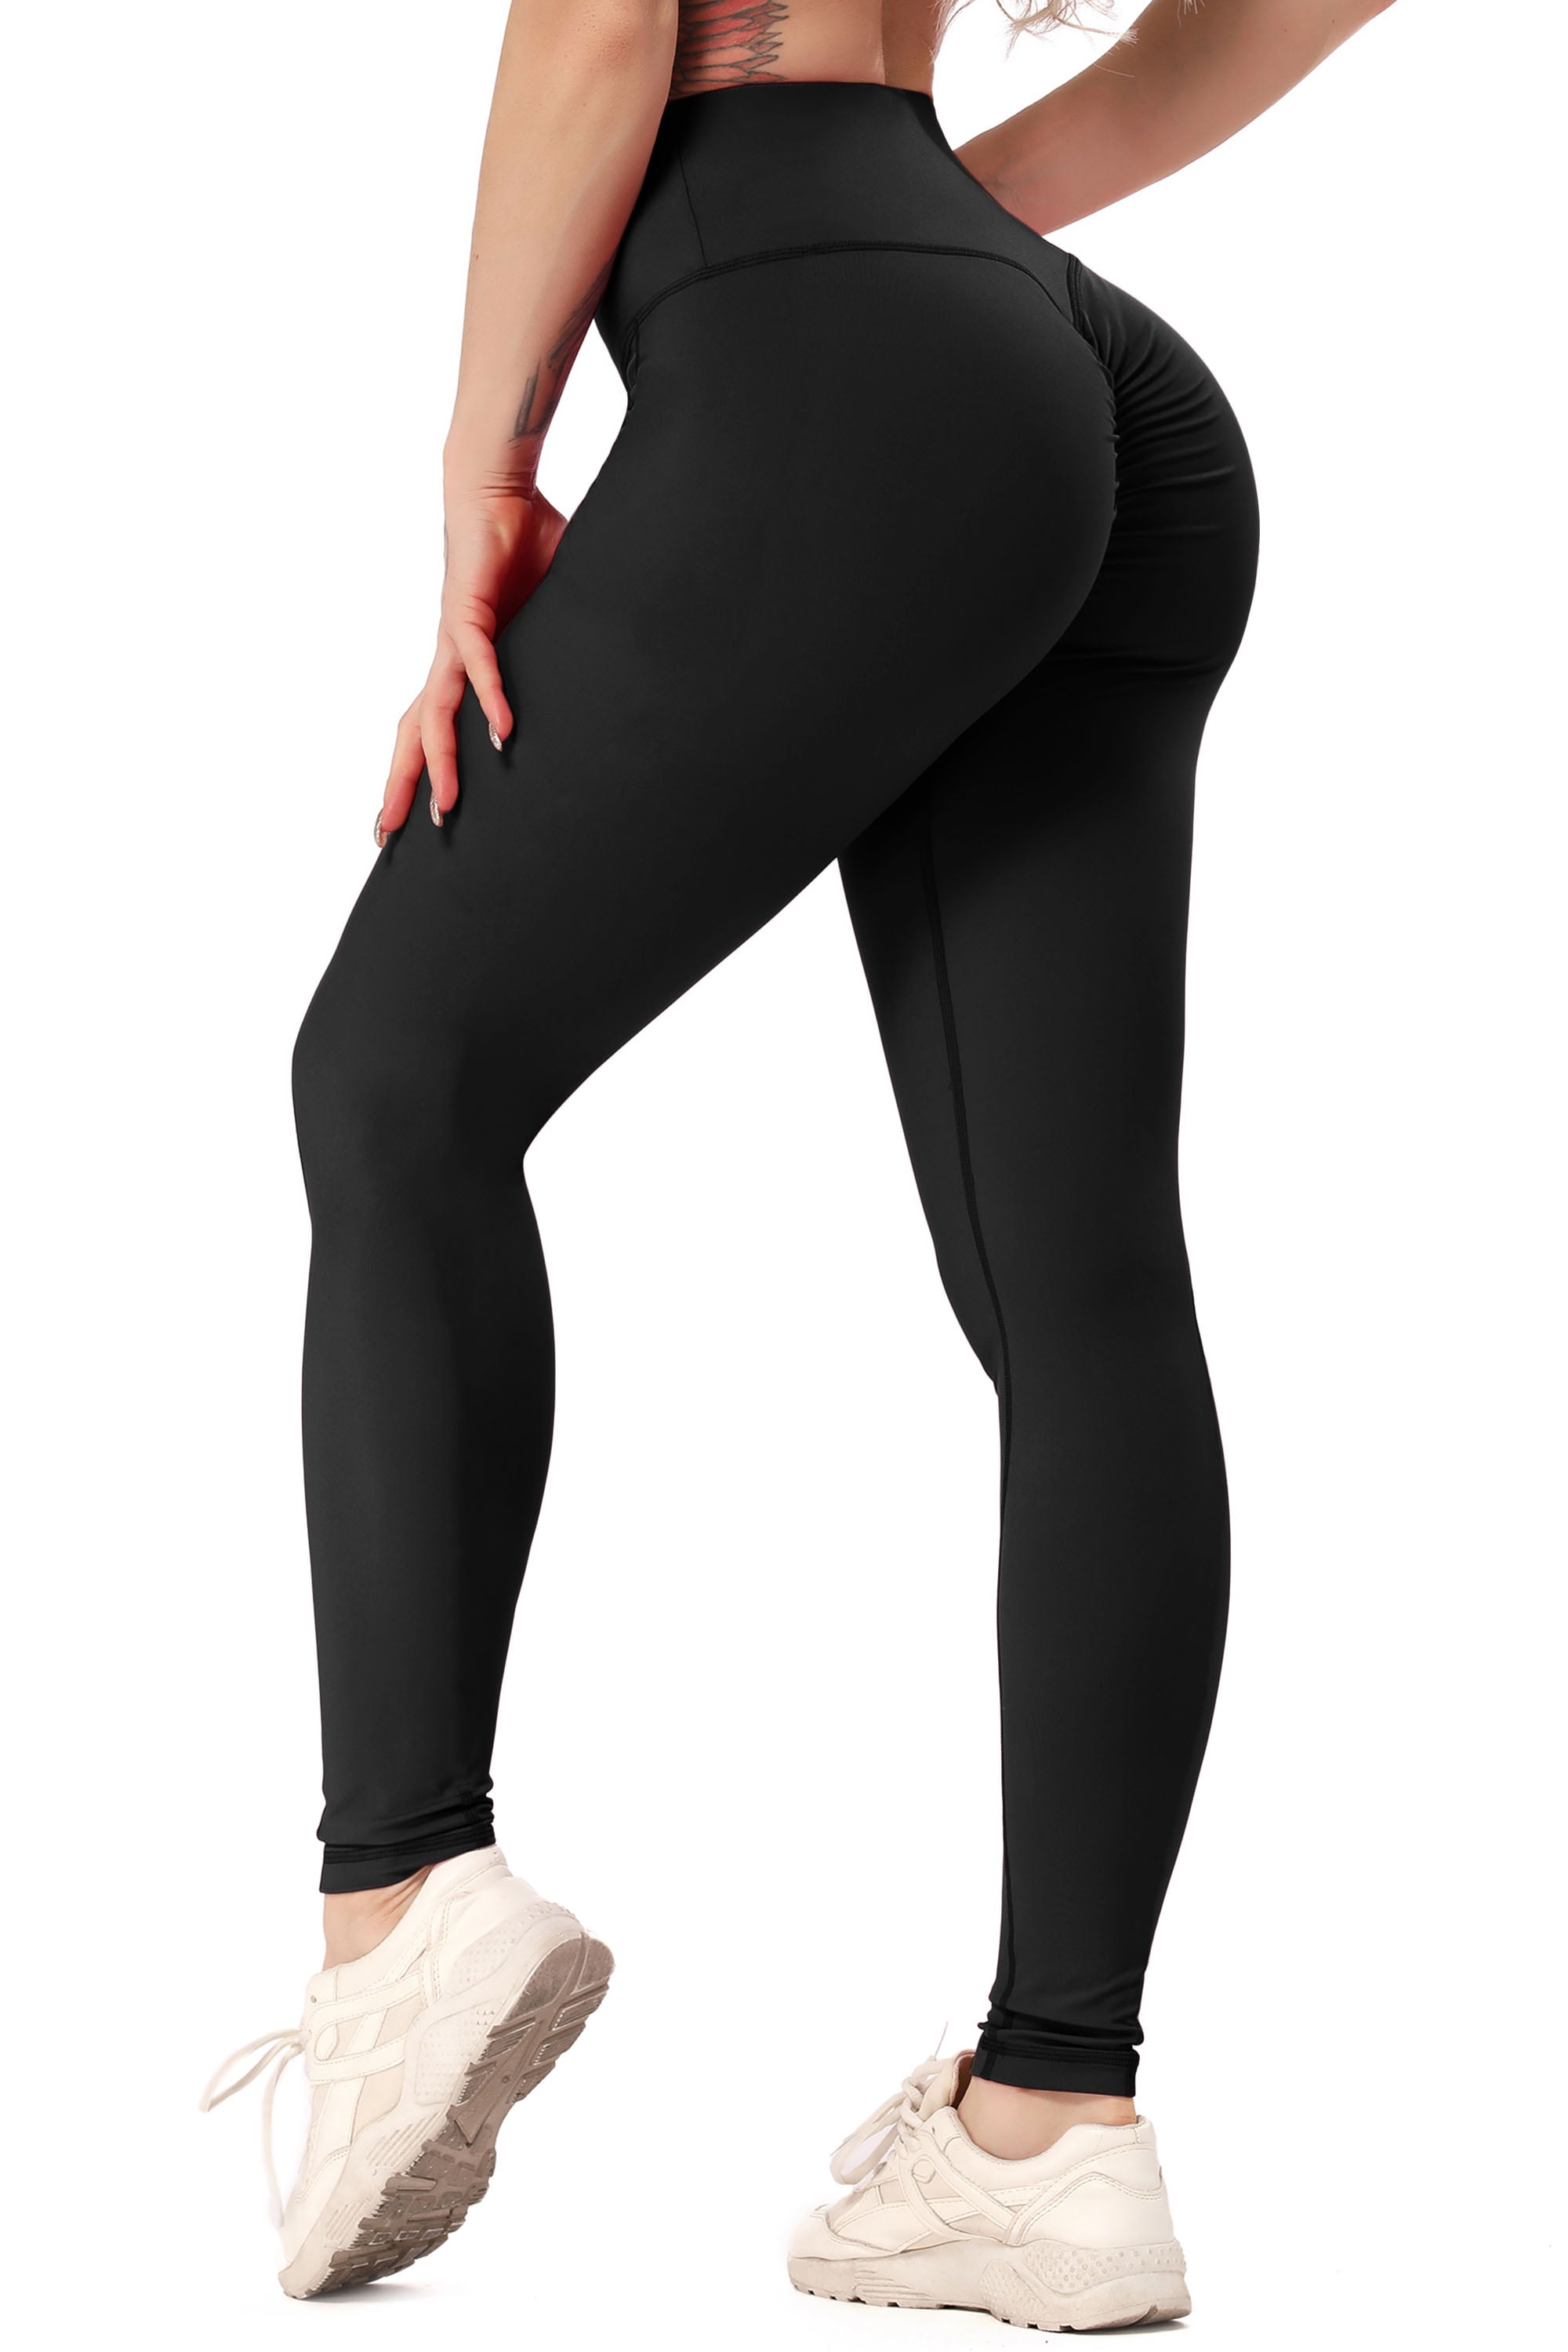 Women Ruched Yoga Pants Compression Butt Lift Leggings Booty Gym Sport Trousers 